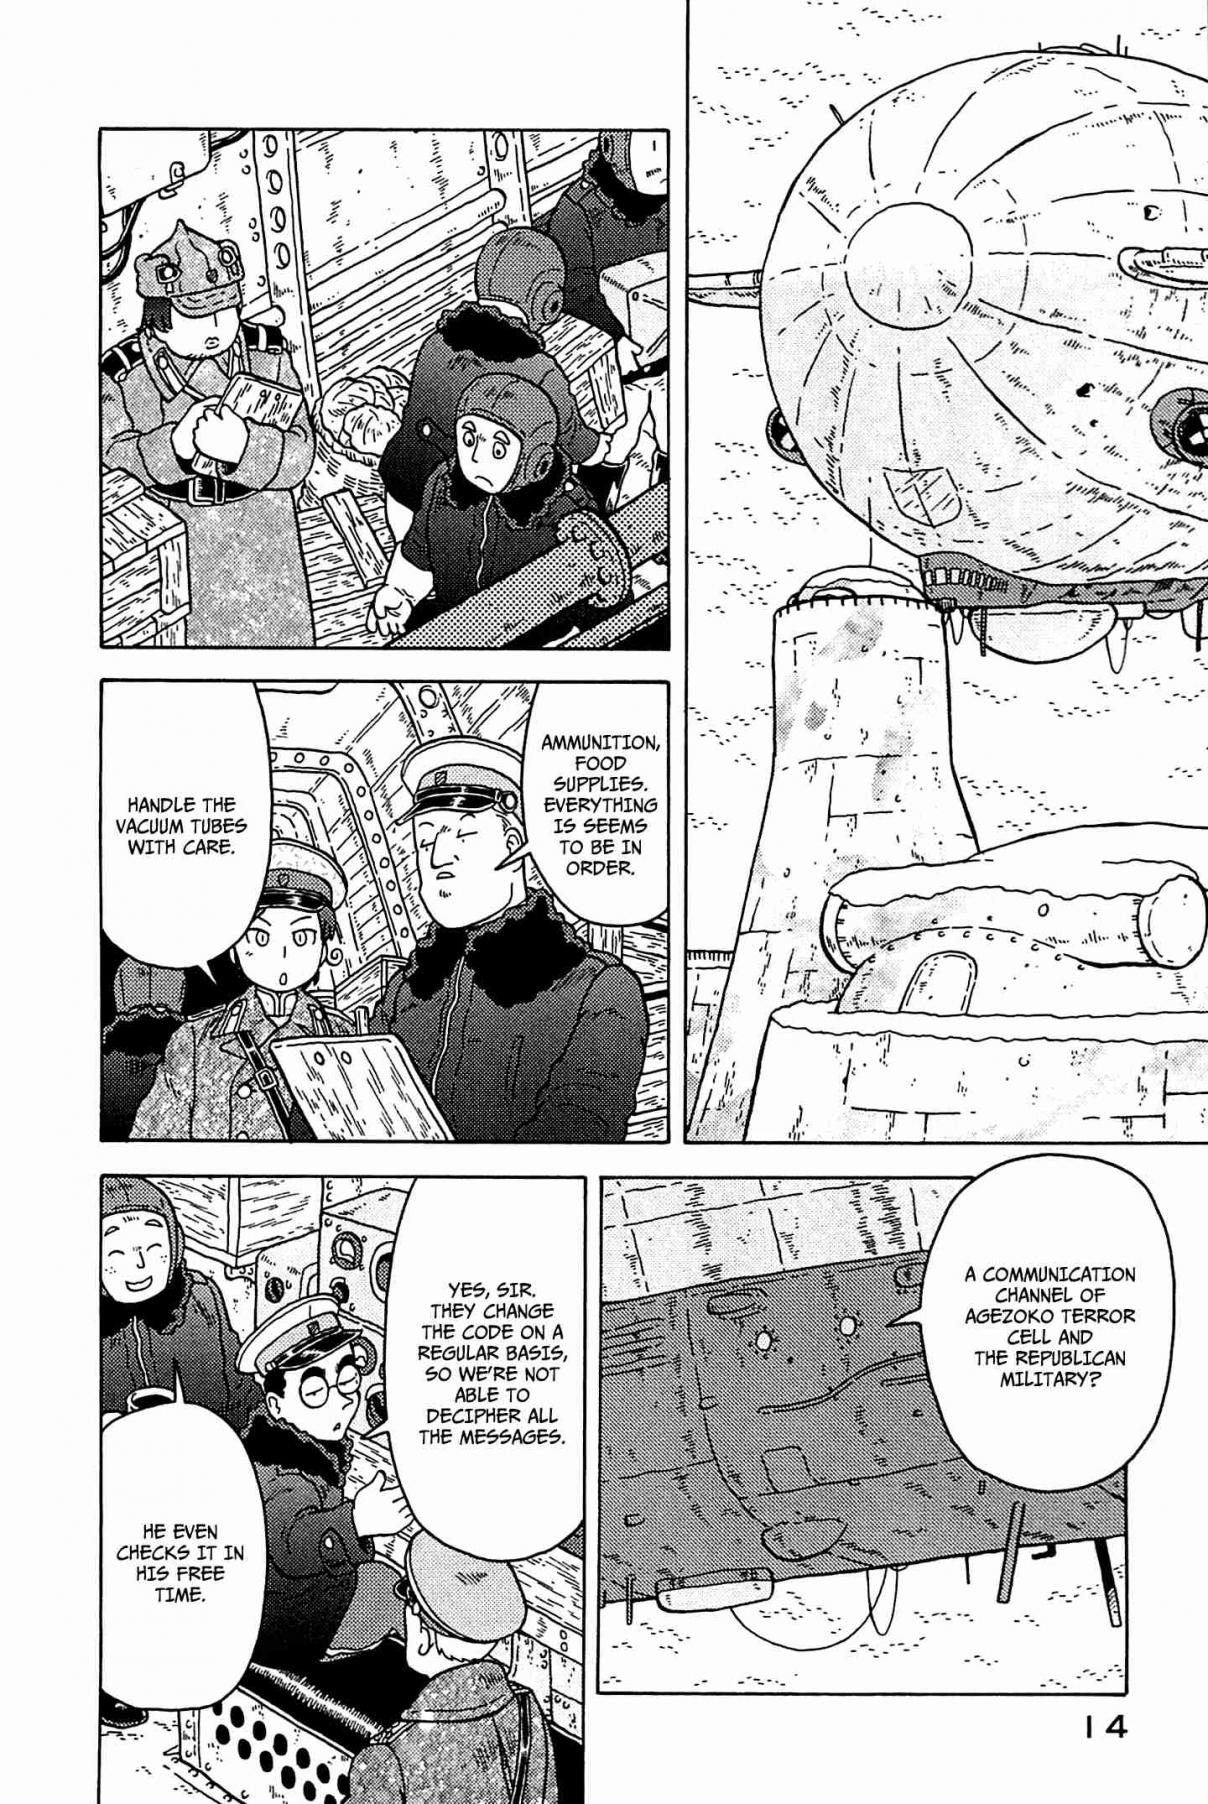 Guns and Stamps Vol. 4 Ch. 23 How are They Doing Without the Lieutenant?